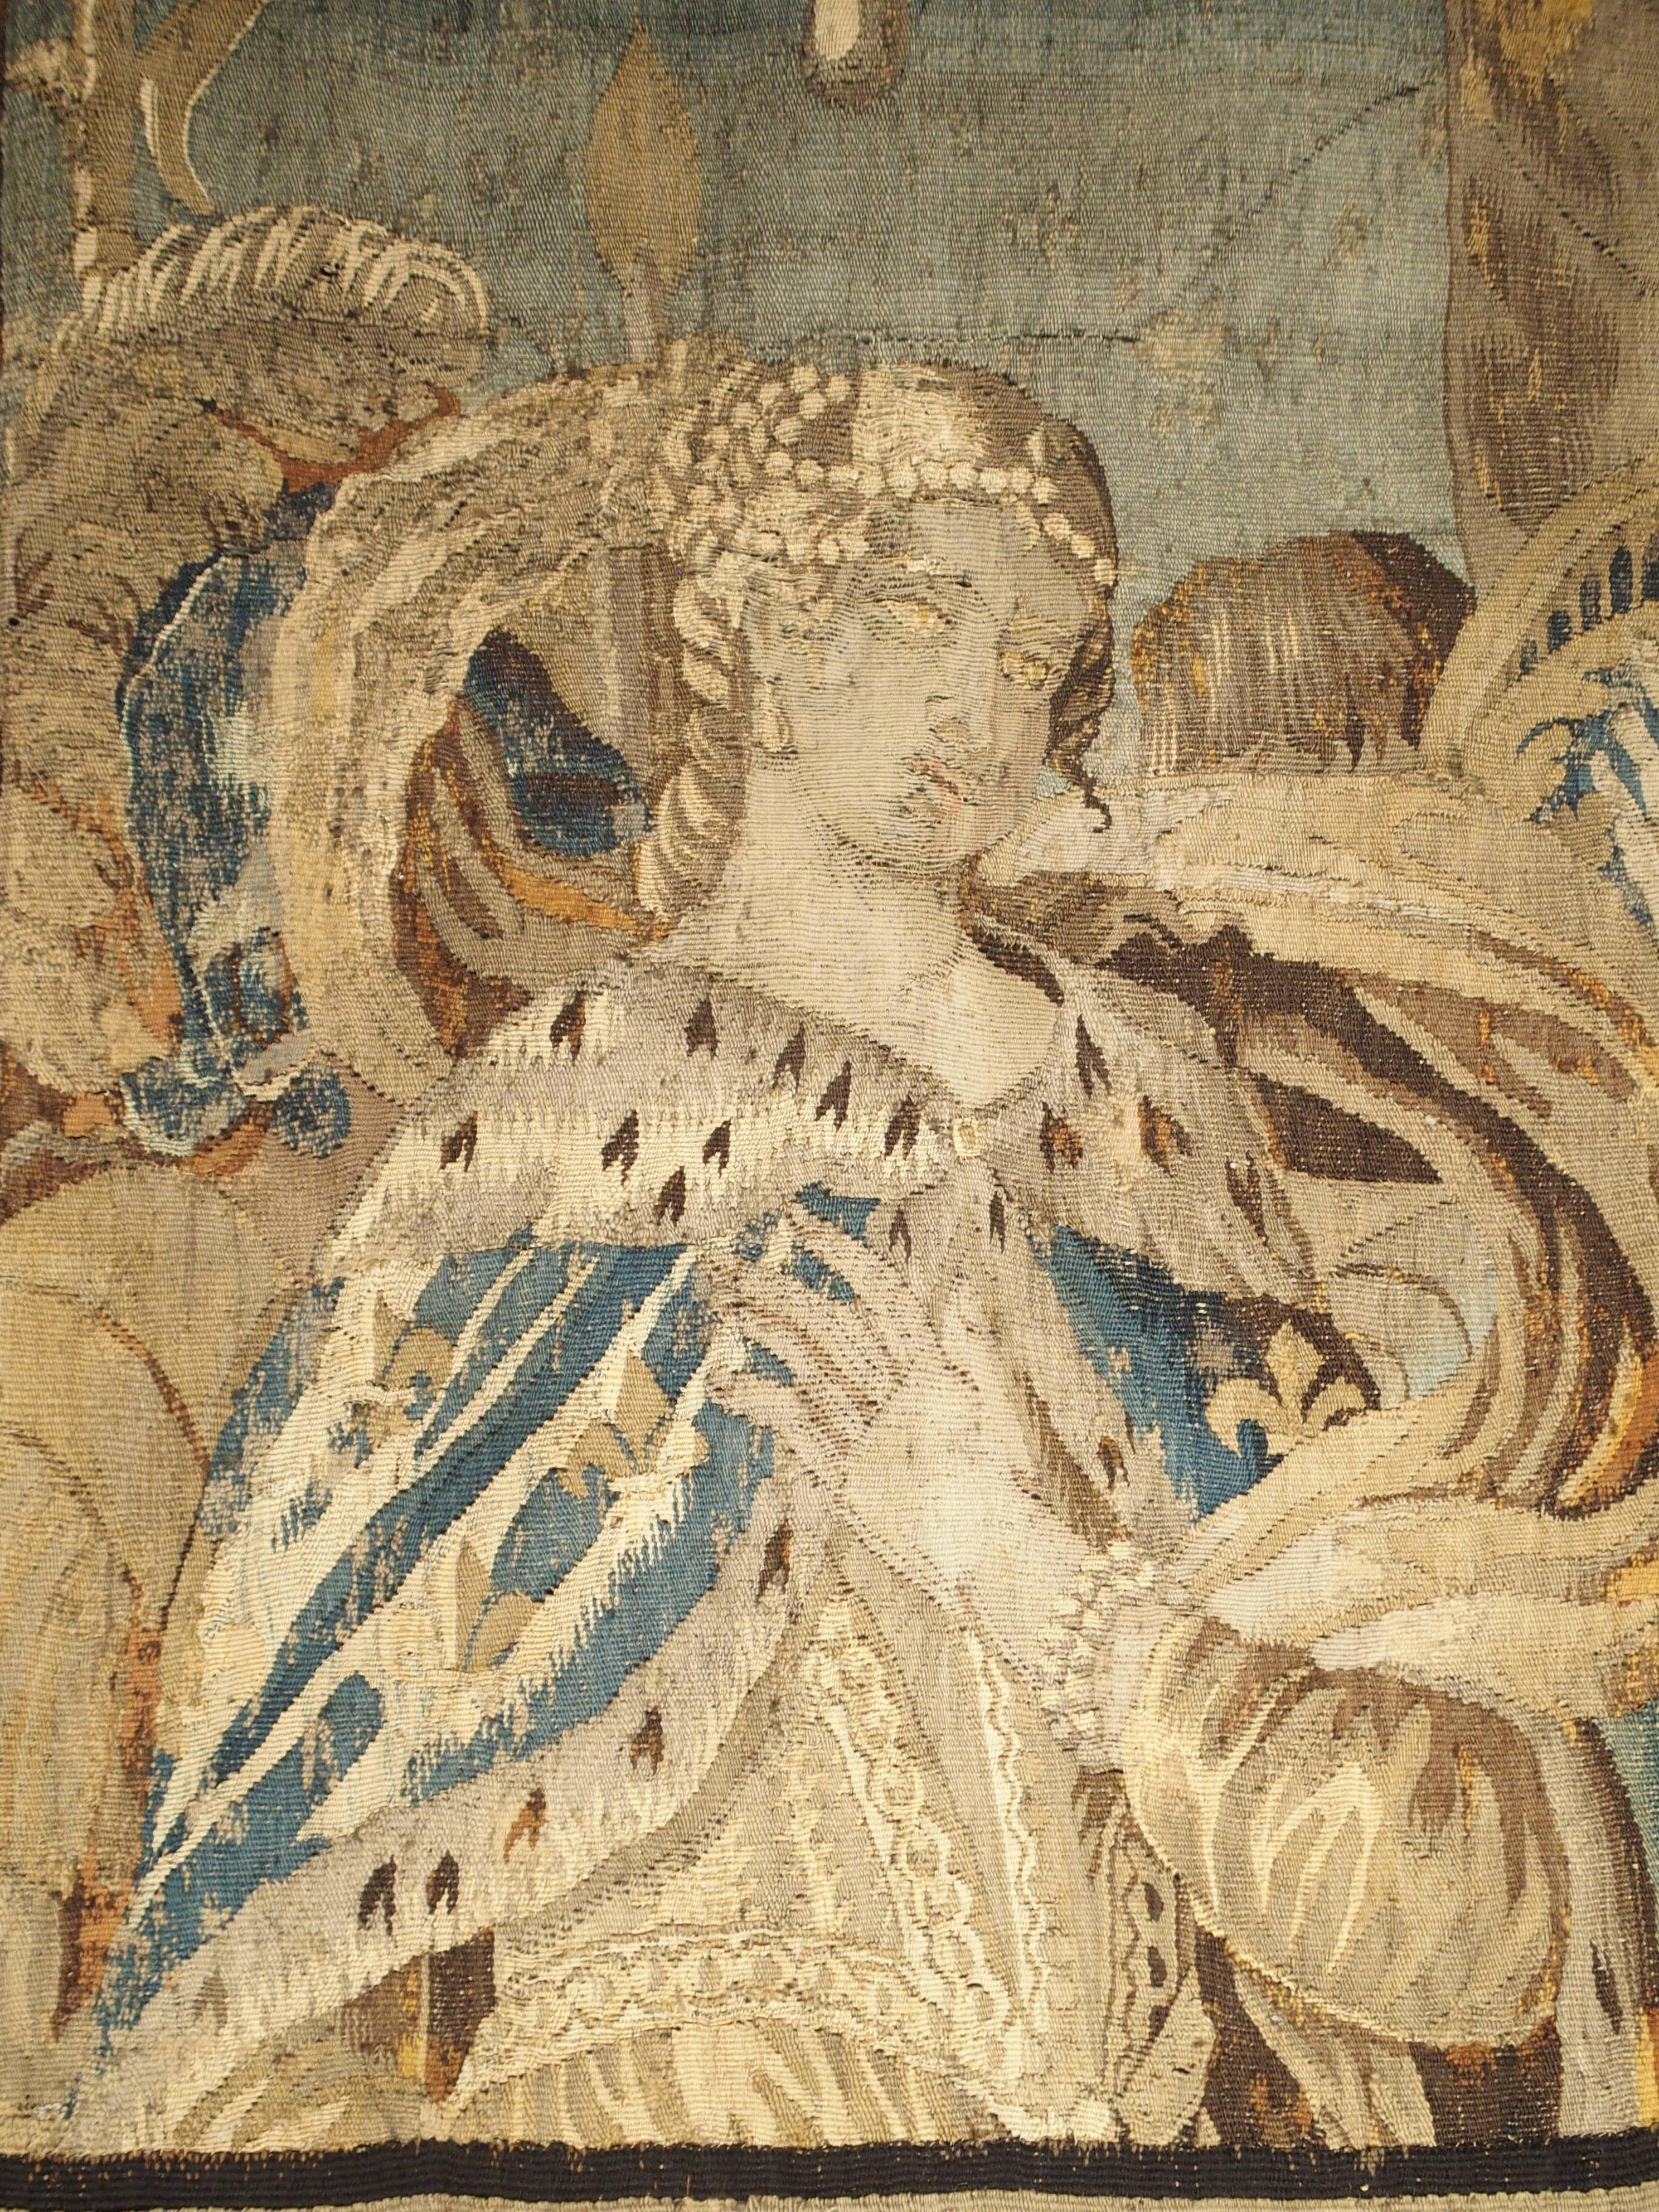 17th Century Tapestry Fragment with Ornate Border 1